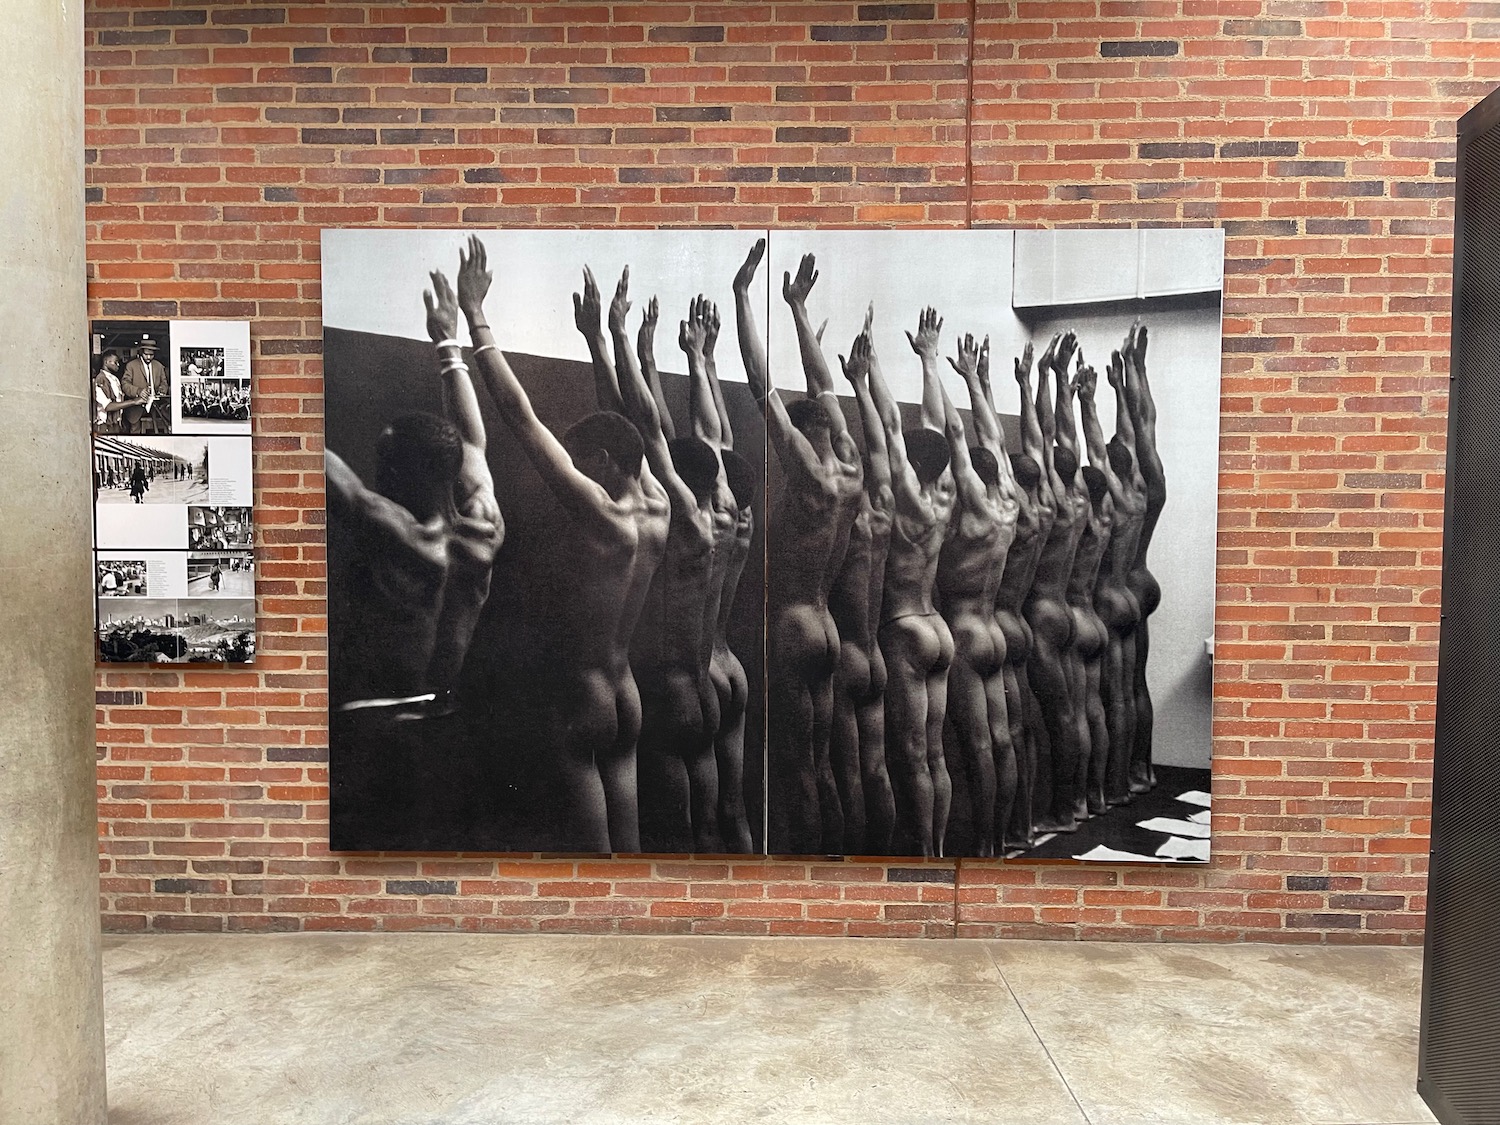 a large picture of naked men raising their hands